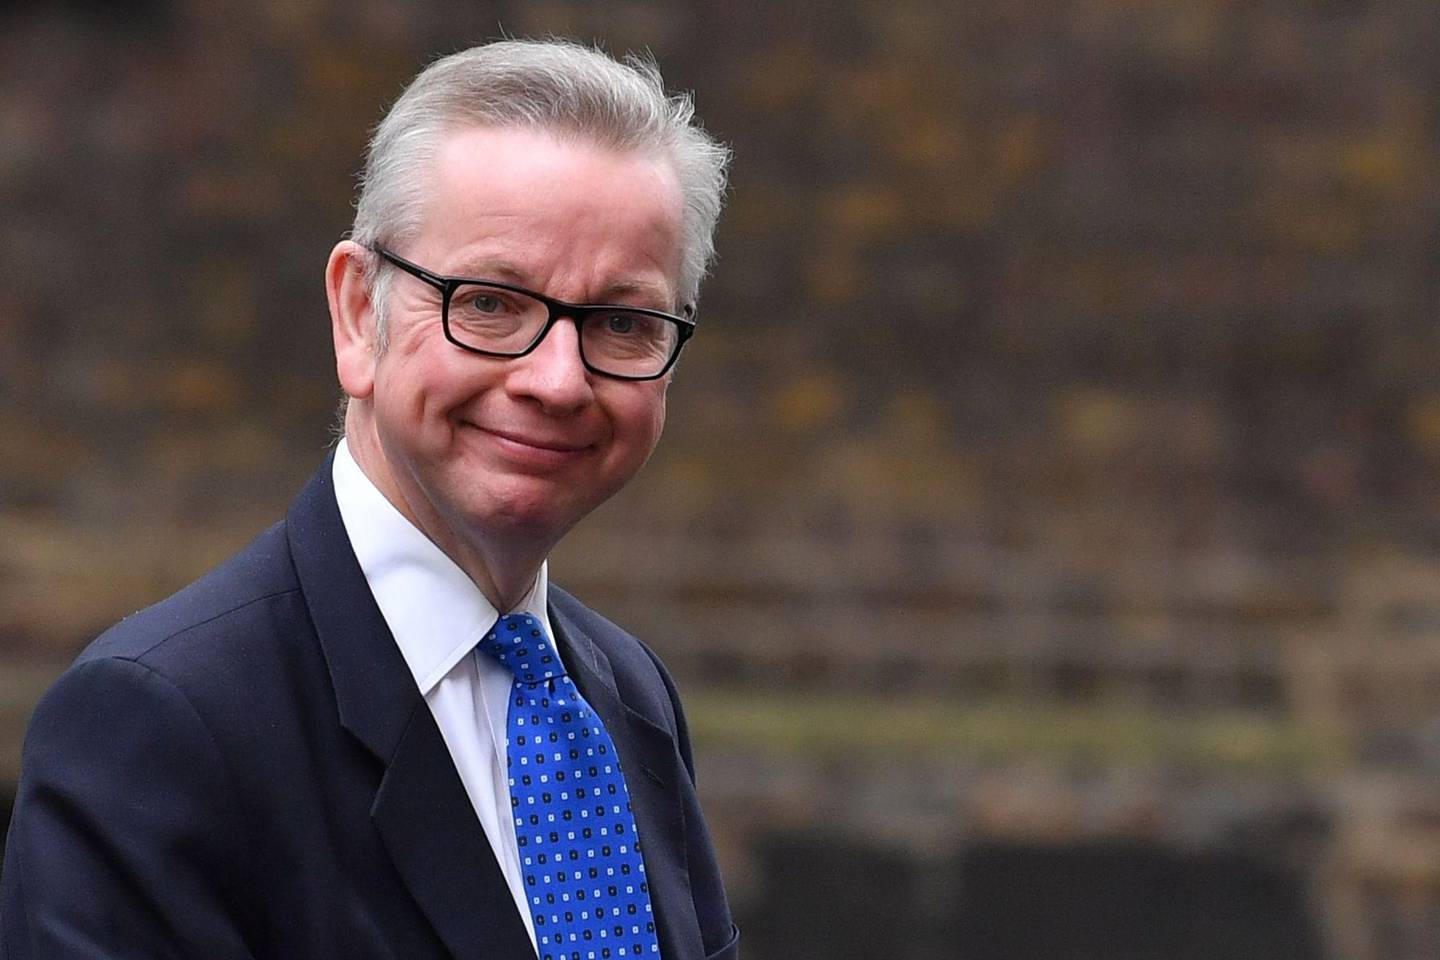 Britain's Environment, Food and Rural Affairs Secretary Michael Gove leaves Downing street in central London on April 8, 2019. - Prime Minister Theresa May will today press ahead with her bid for a Brexit "compromise" with the opposition despite a backlash from her own party, as she attempts to prevent Britain crashing out of the European Union this week. (Photo by Ben STANSALL / AFP)